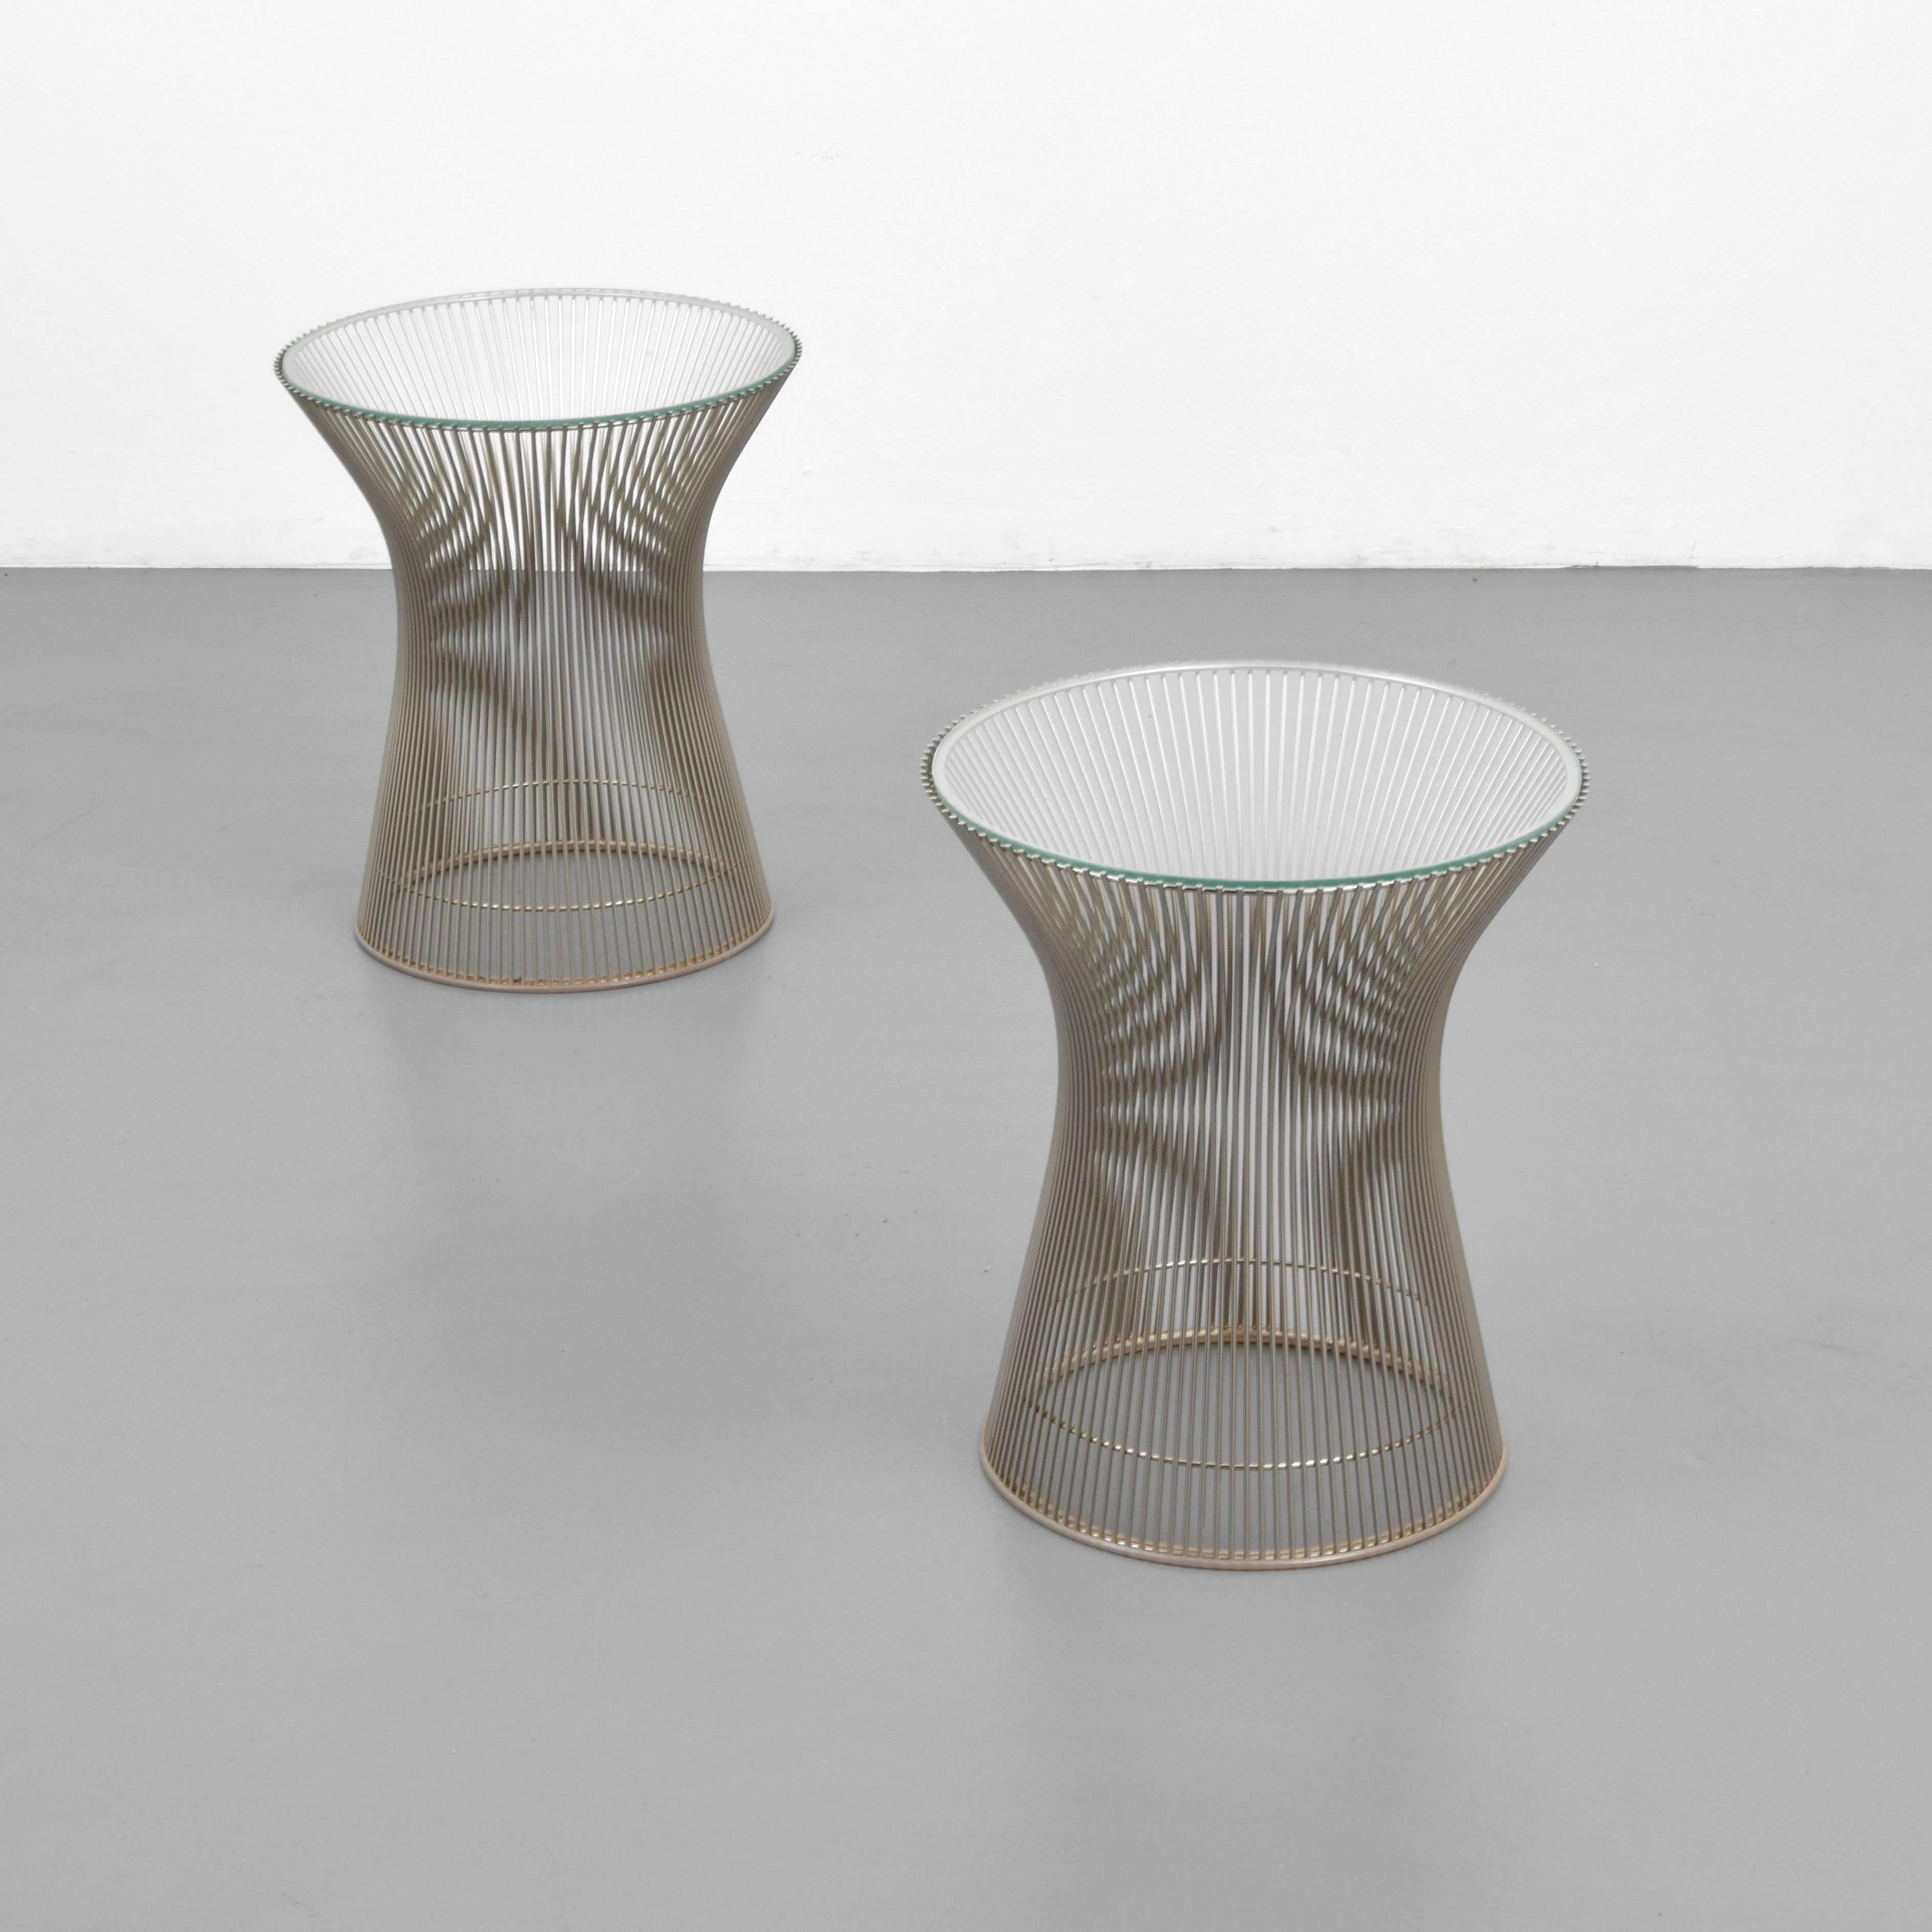 Pair of end or side tables by Warren Platner for Knoll. Reference: Knoll, a Modernist Universe, Brian Lutz, pg. 166.